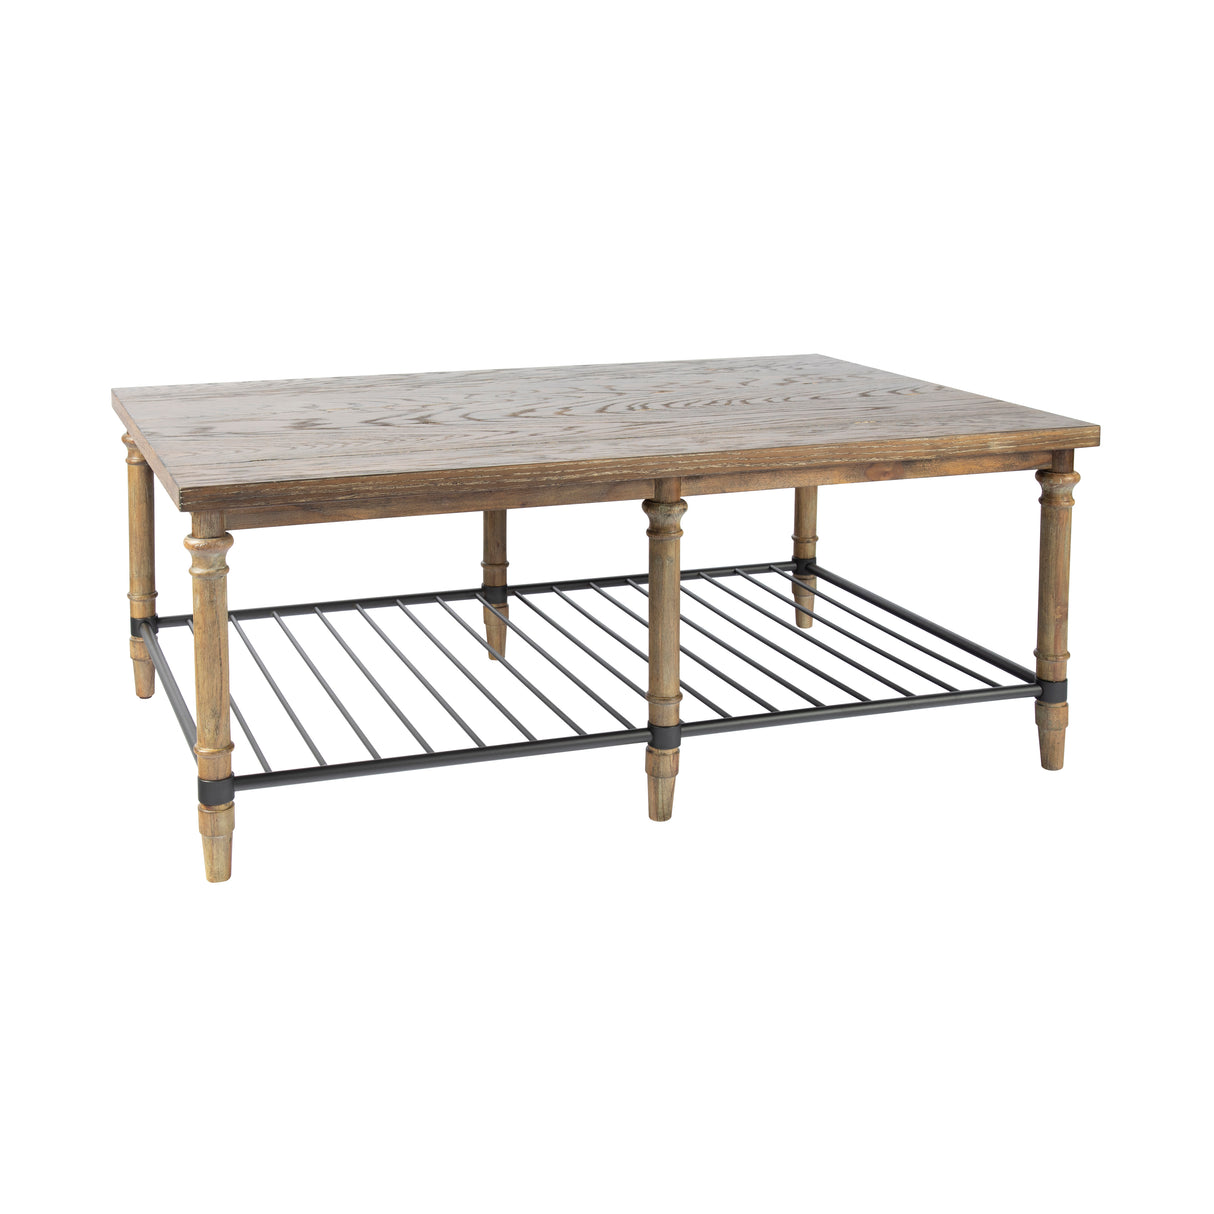 Elk 571-011 Beacon Hill Coffee Table - Natural